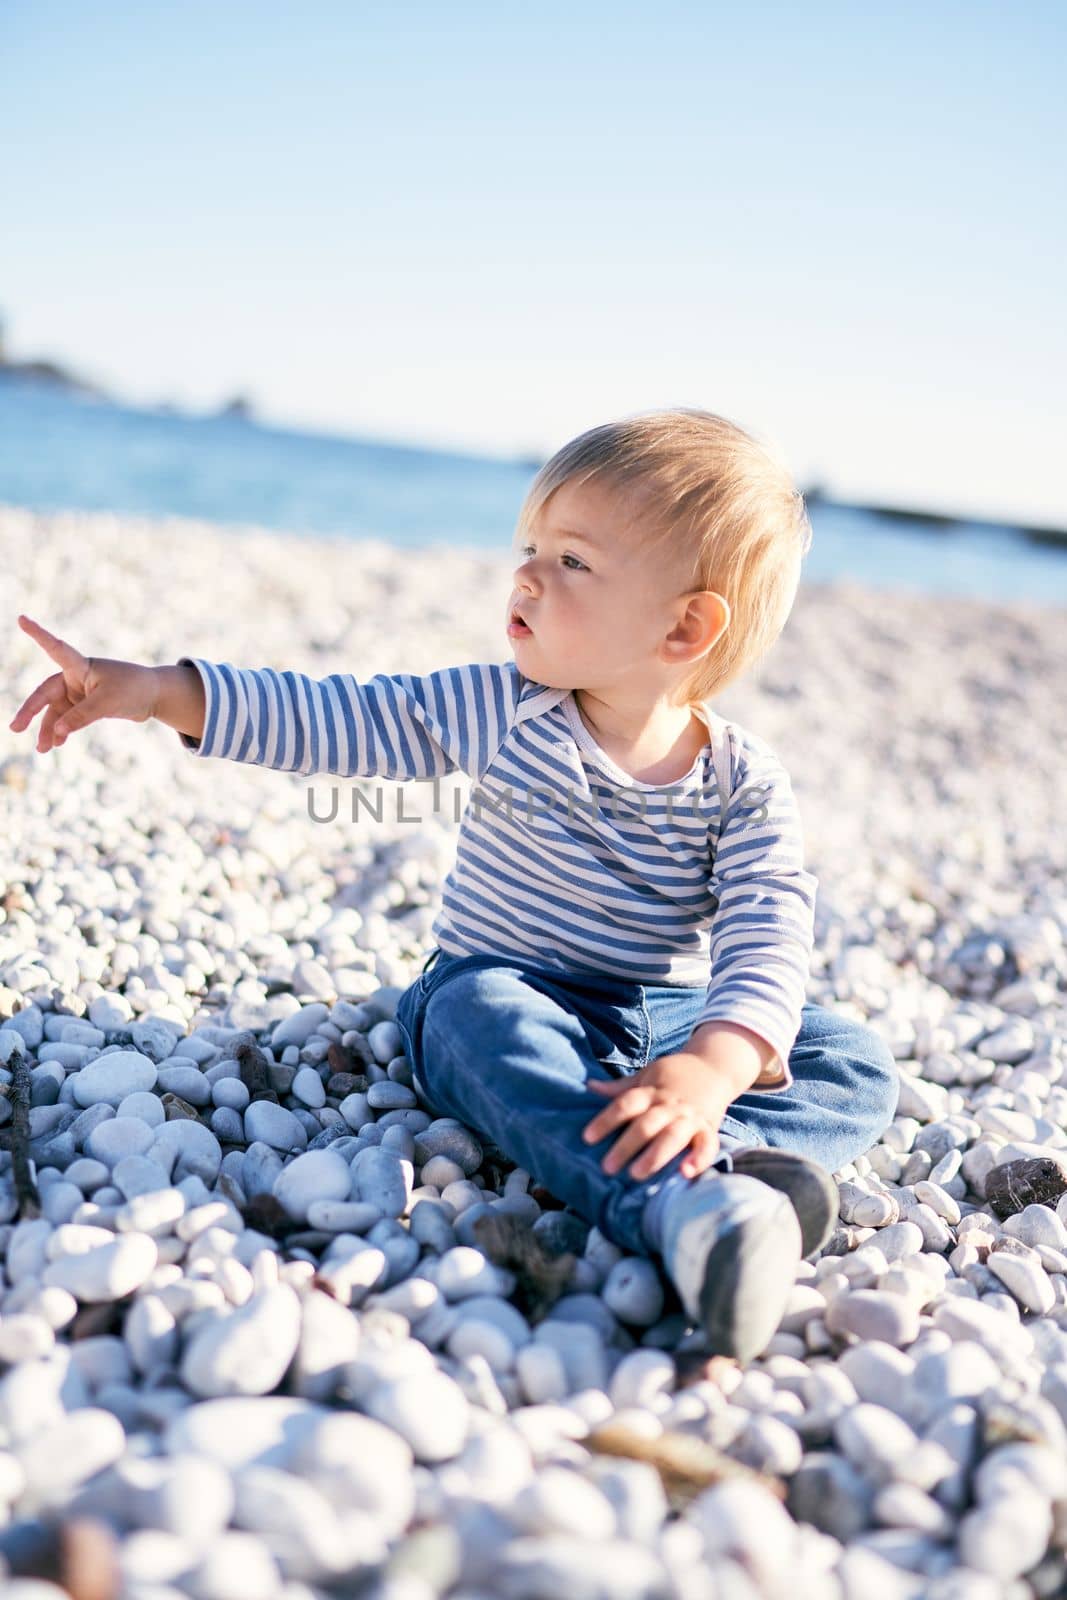 Kid sits on a pebble beach by the sea and points his finger into the distance by Nadtochiy